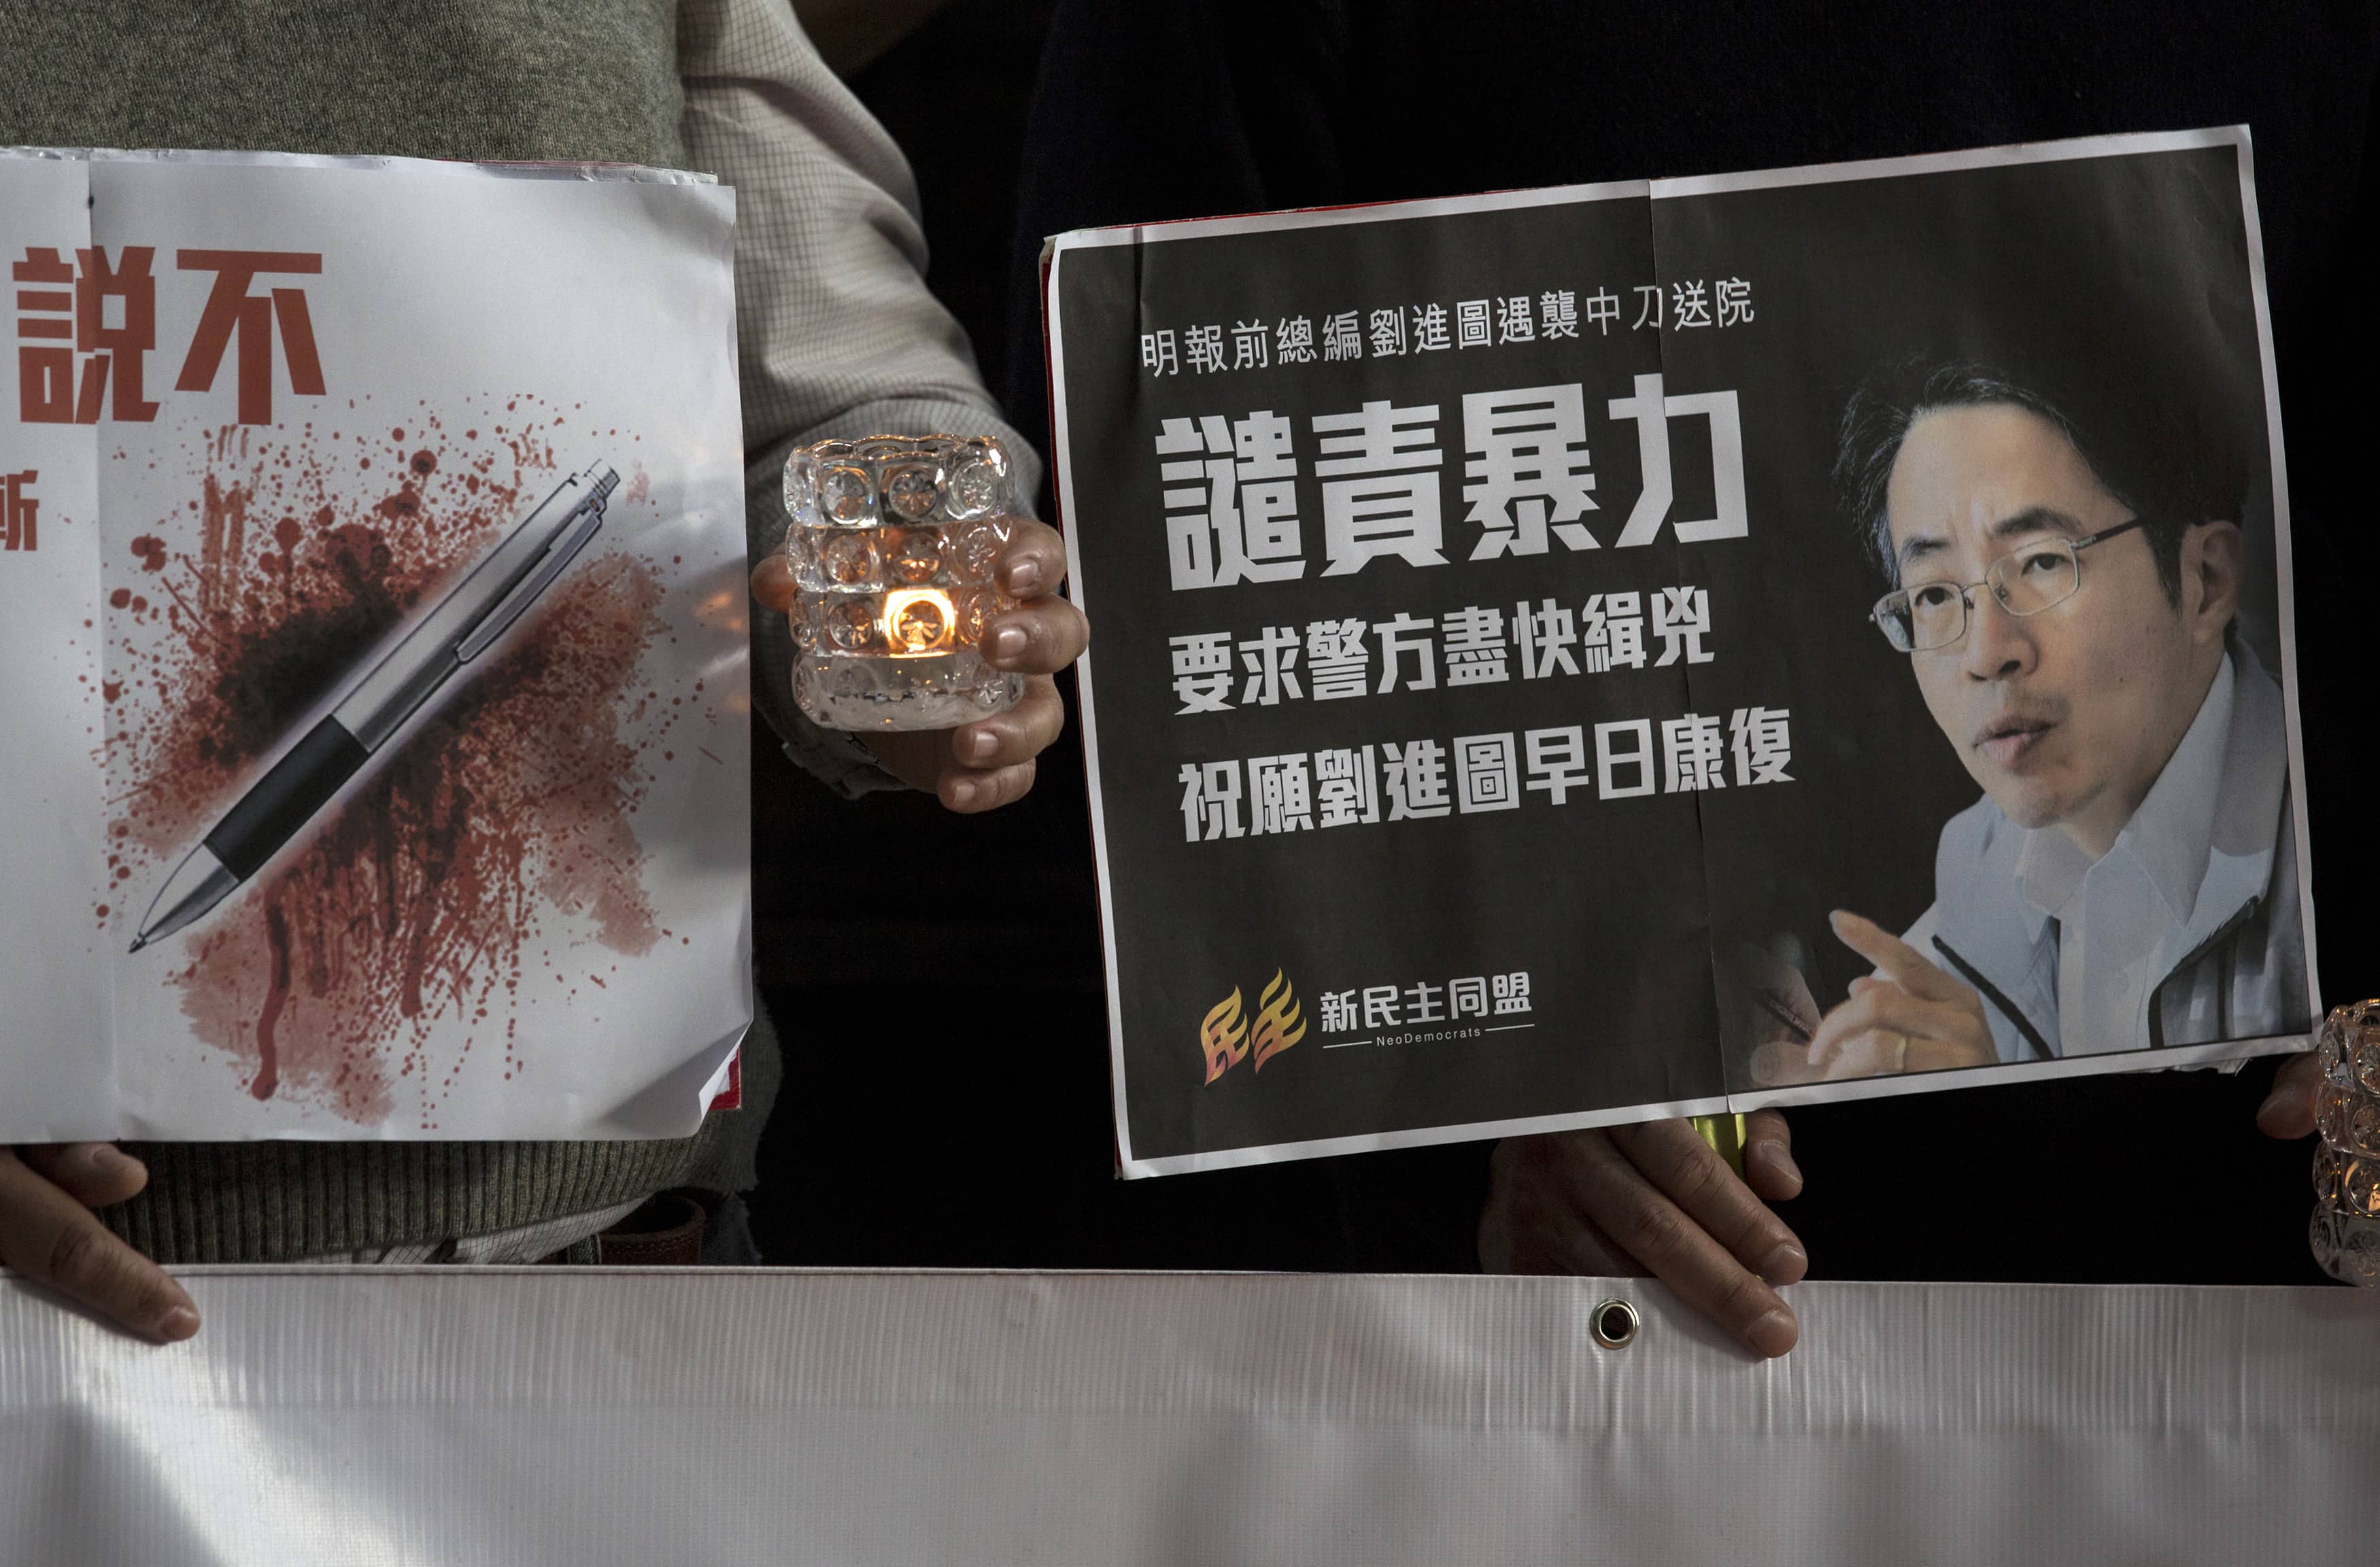 During a 26 February 2014 candlelight vigil in a Hong Kong hospital, activists urge the police to investigate the attack on Kevin Lau (whose image appears on the sign), REUTERS/Tyrone Siu